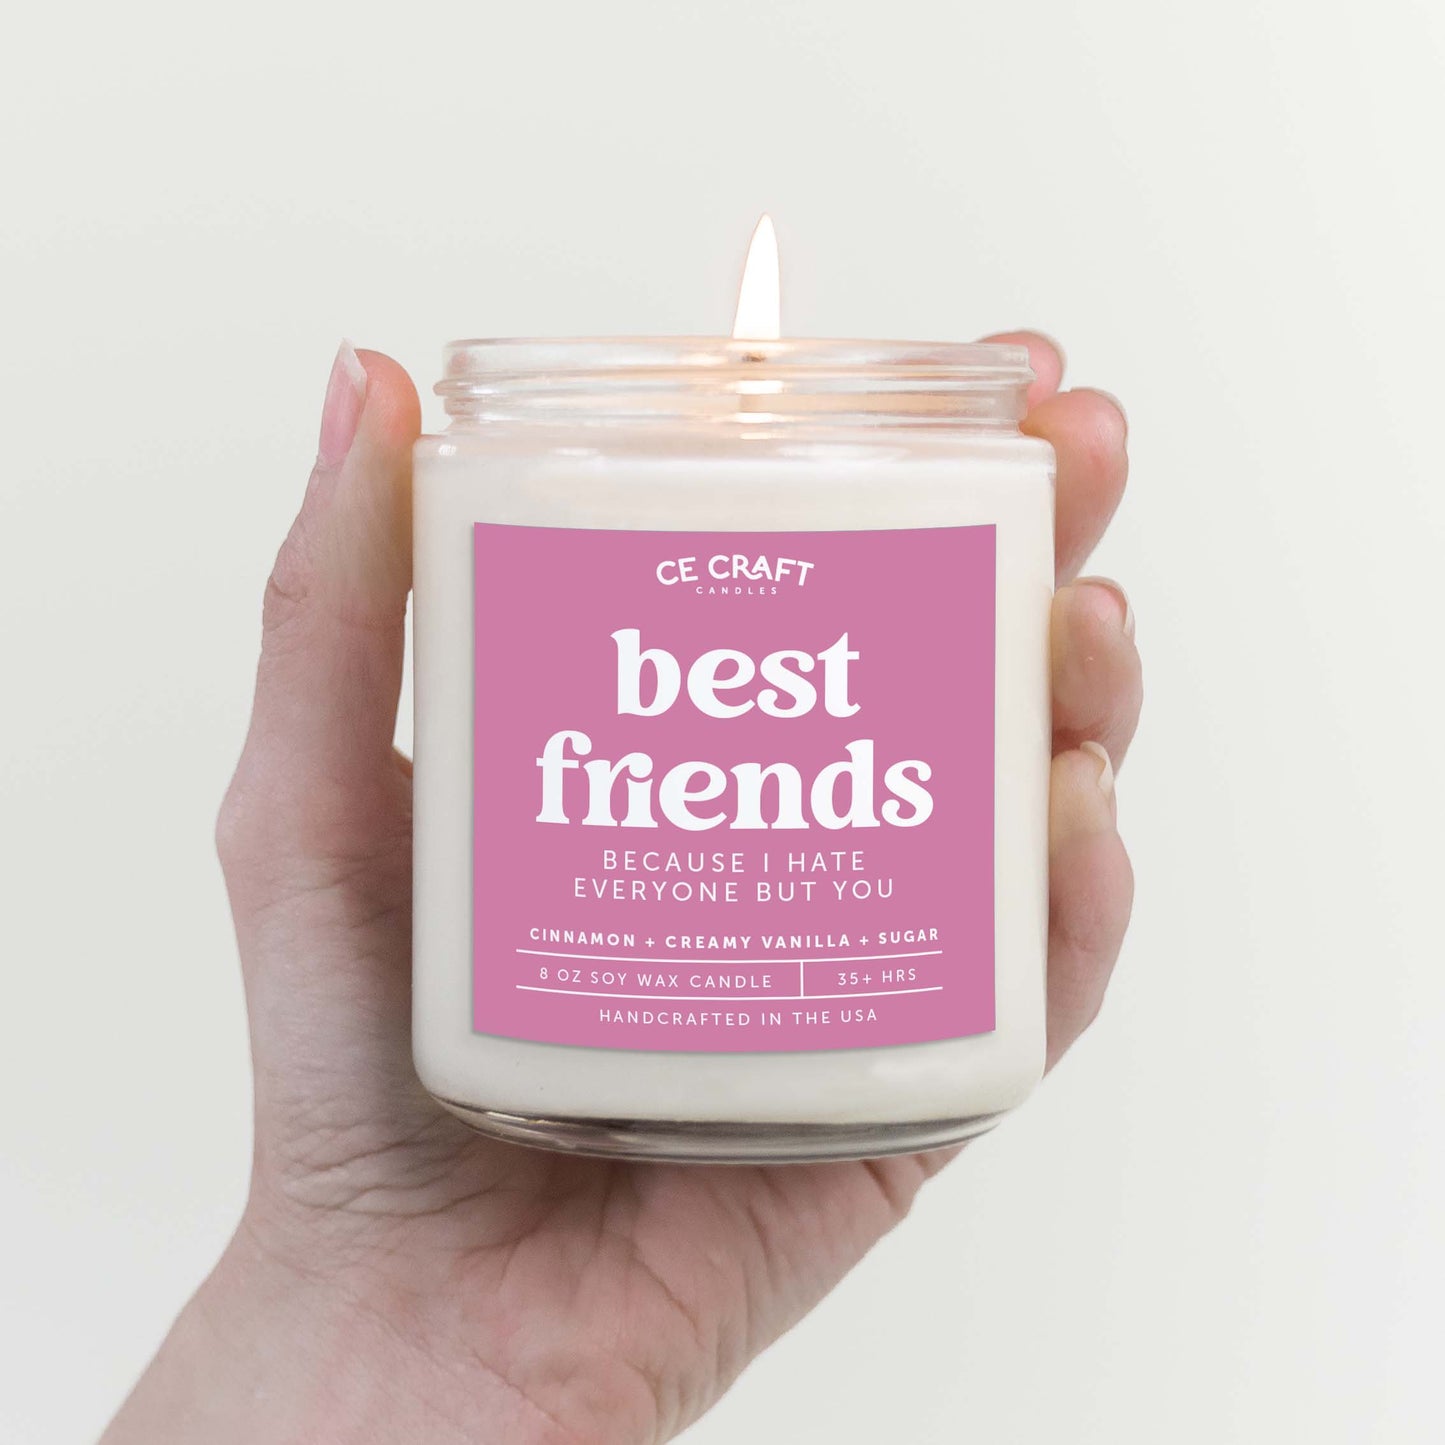 Best Friends Because I Hate Everyone But You Candle Candles CE Craft 